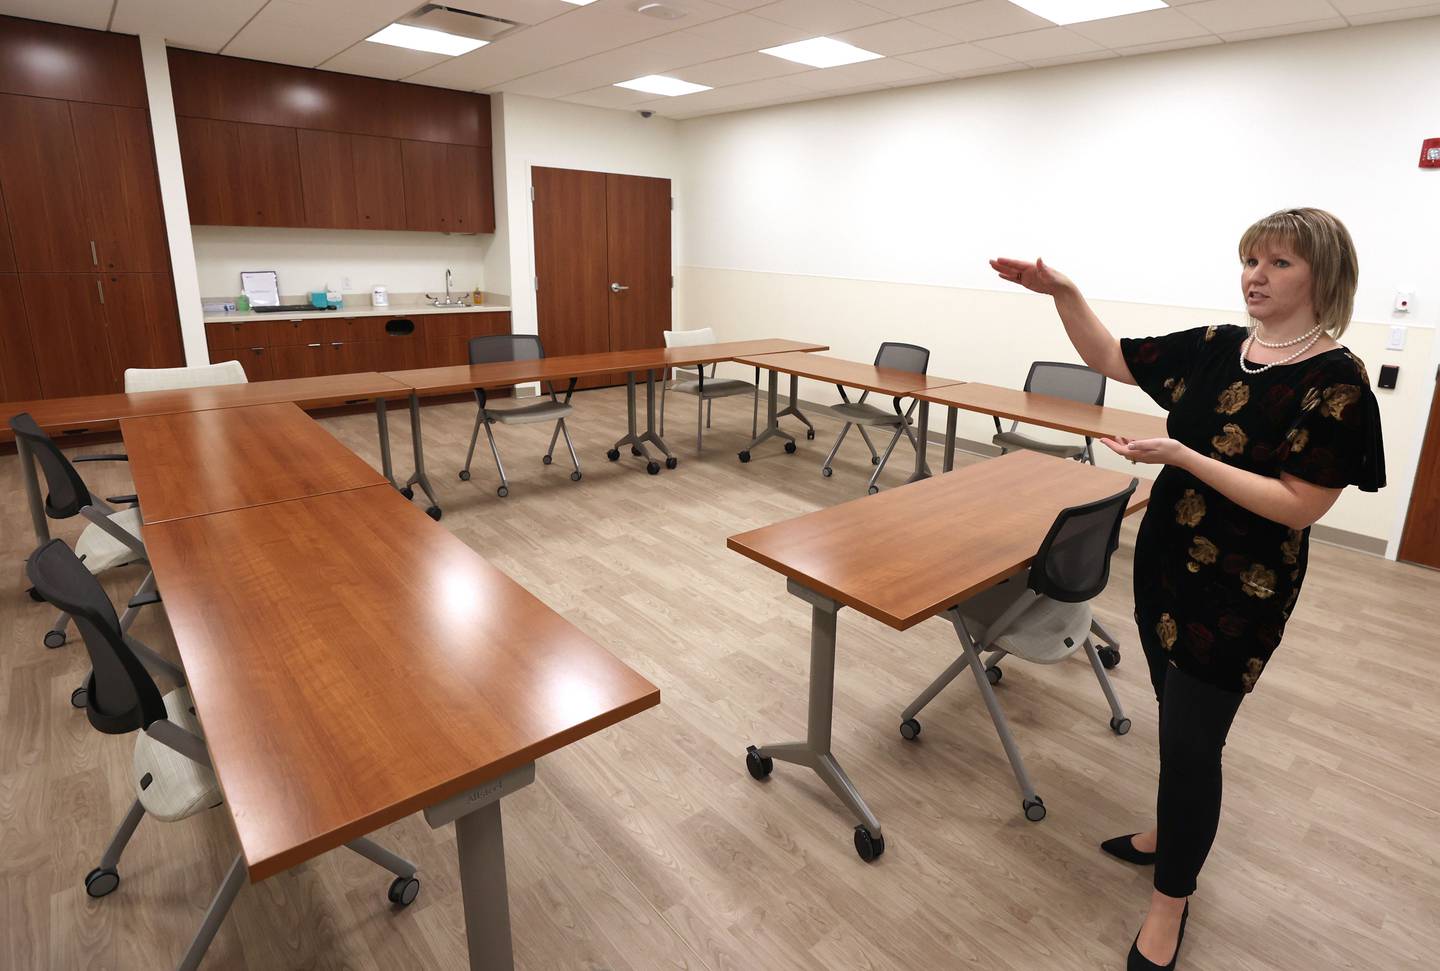 Marissa Kirch, licensed clinical social worker and manager of the partial hospitalization program and intensive outpatient treatment program at the Northwestern Medicine Behavioral Health Services Sycamore Clinic, gives a tour of the new facility Wednesday, Nov. 30, 2022, in Sycamore.